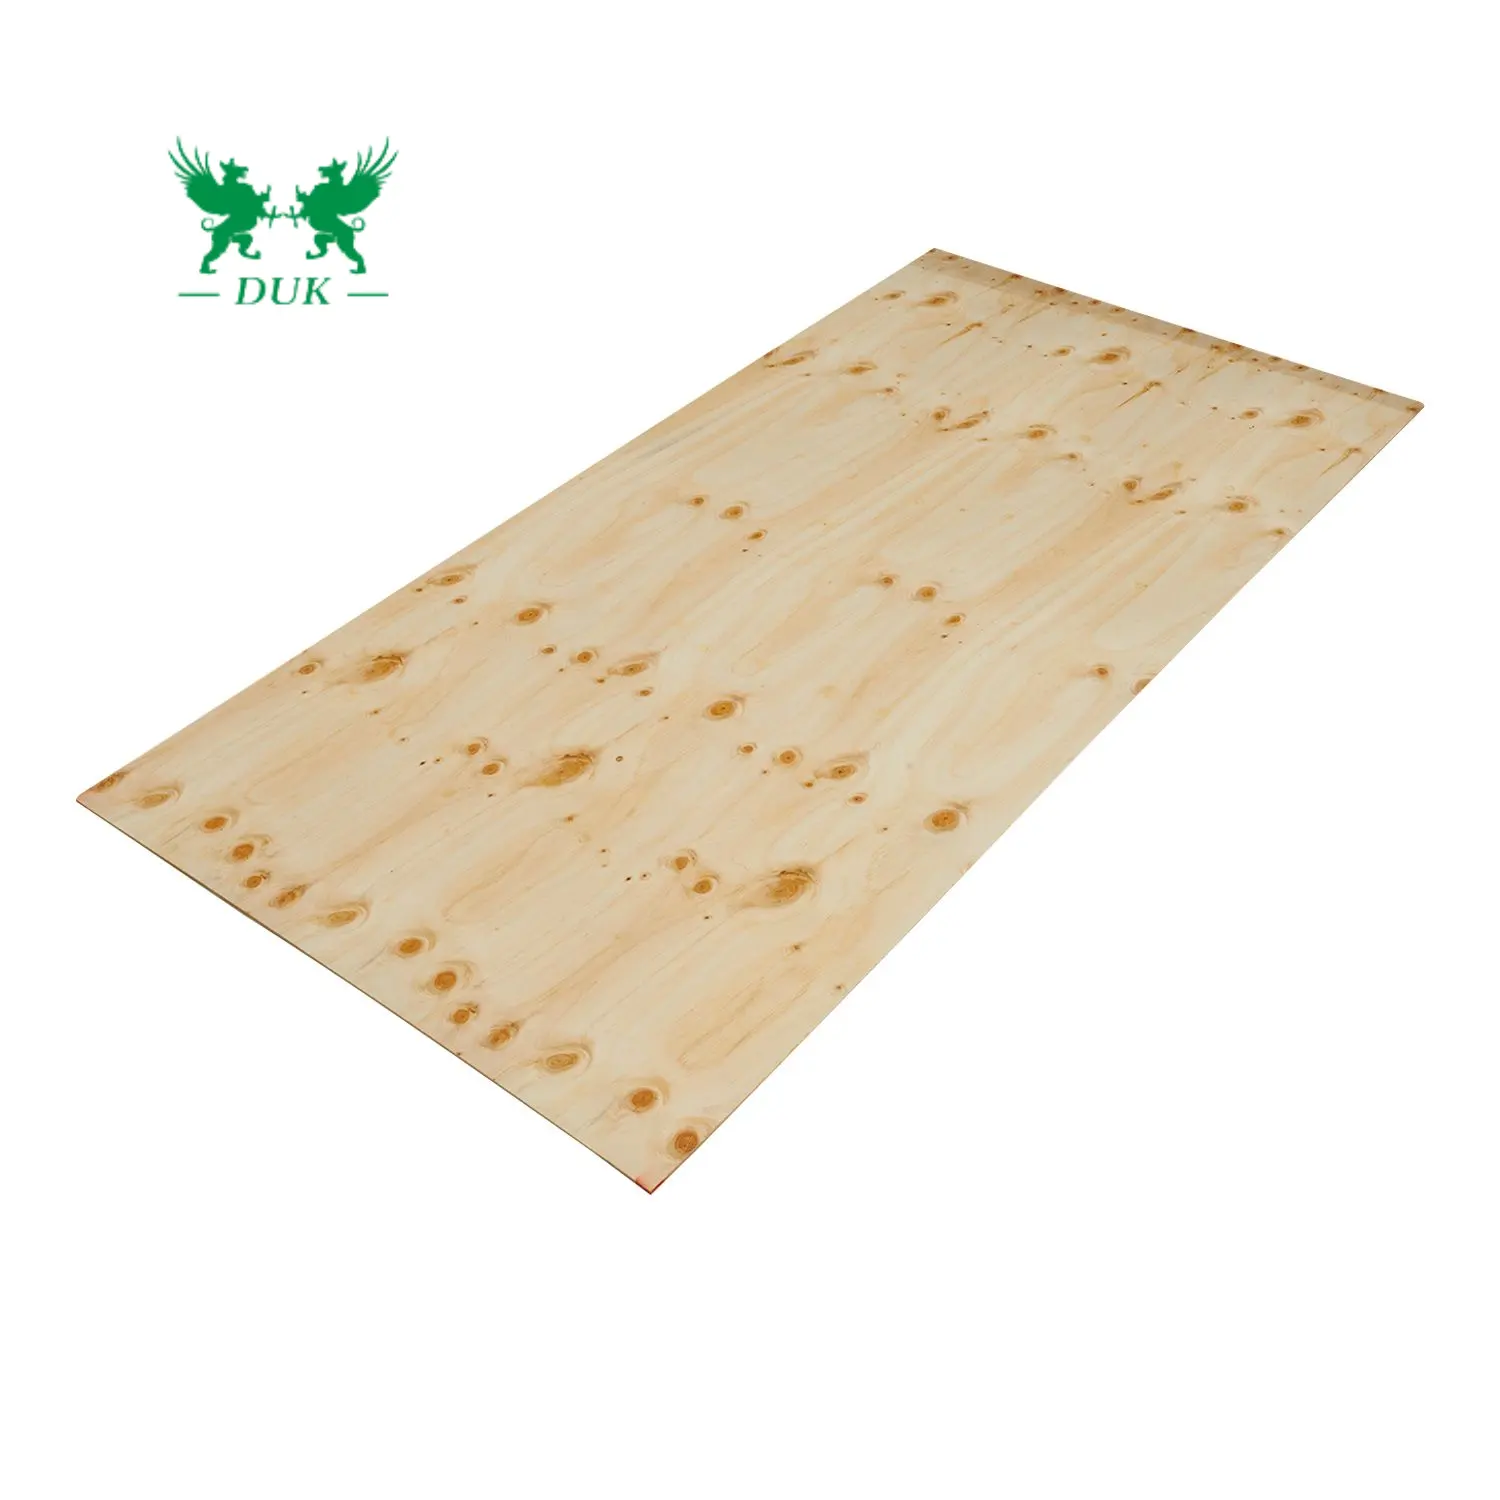 Competitive Price 3mm 6mm 9mm 12mm 15mm 18mm CDX Knot Pine Plywood Birch Plywood Commercial Okoume Furniture Plywood